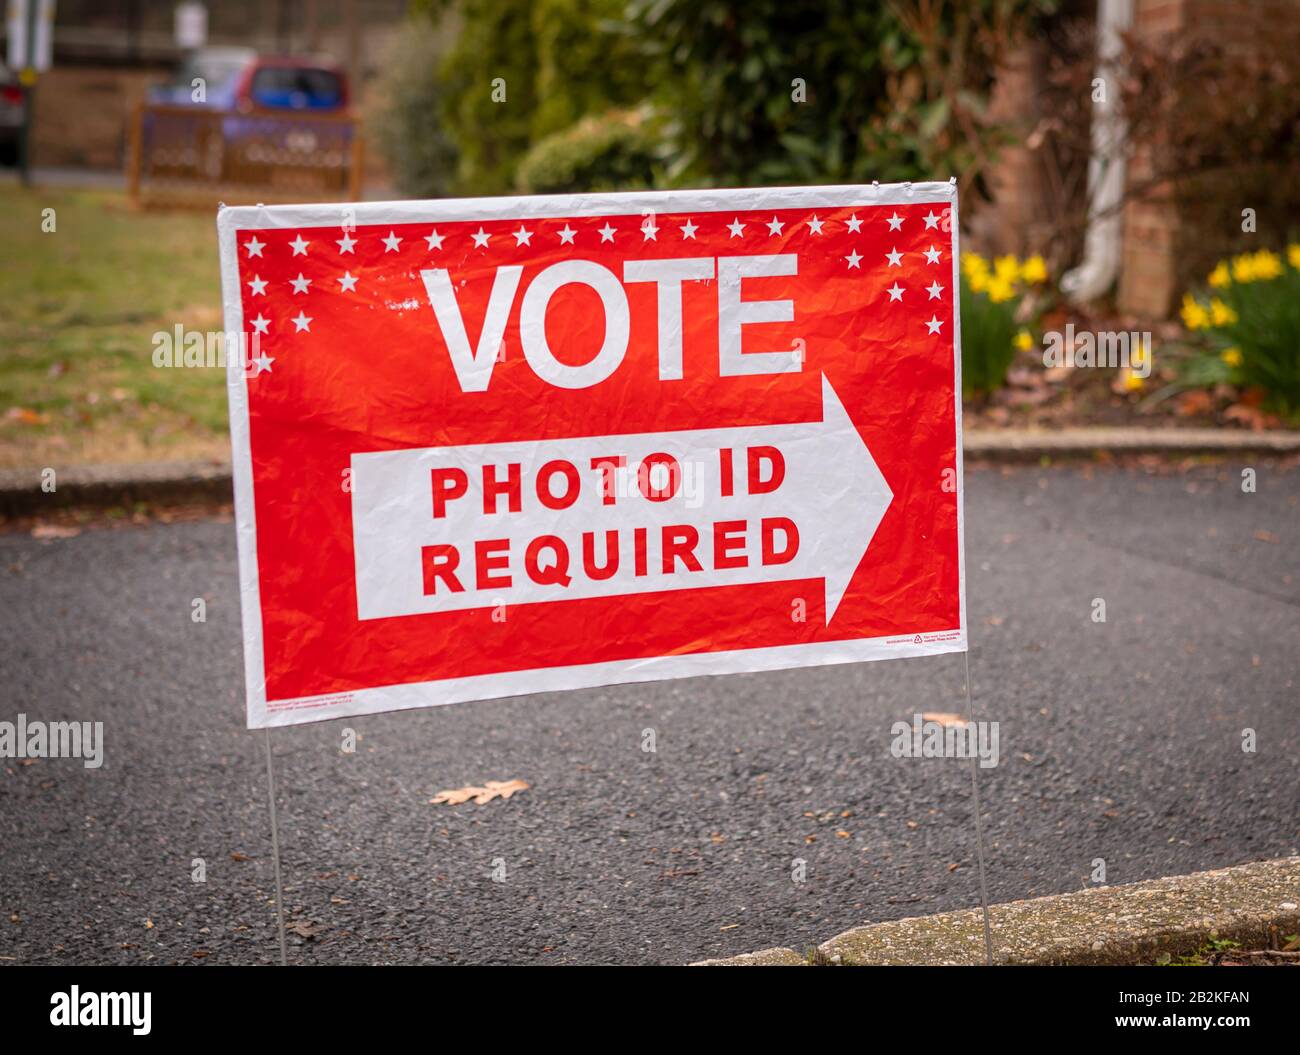 ARLINGTON, VIRGINIA, USA - MARCH 3, 2020: Democratic primary election voting sign, Vote Photo ID Required. Stock Photo